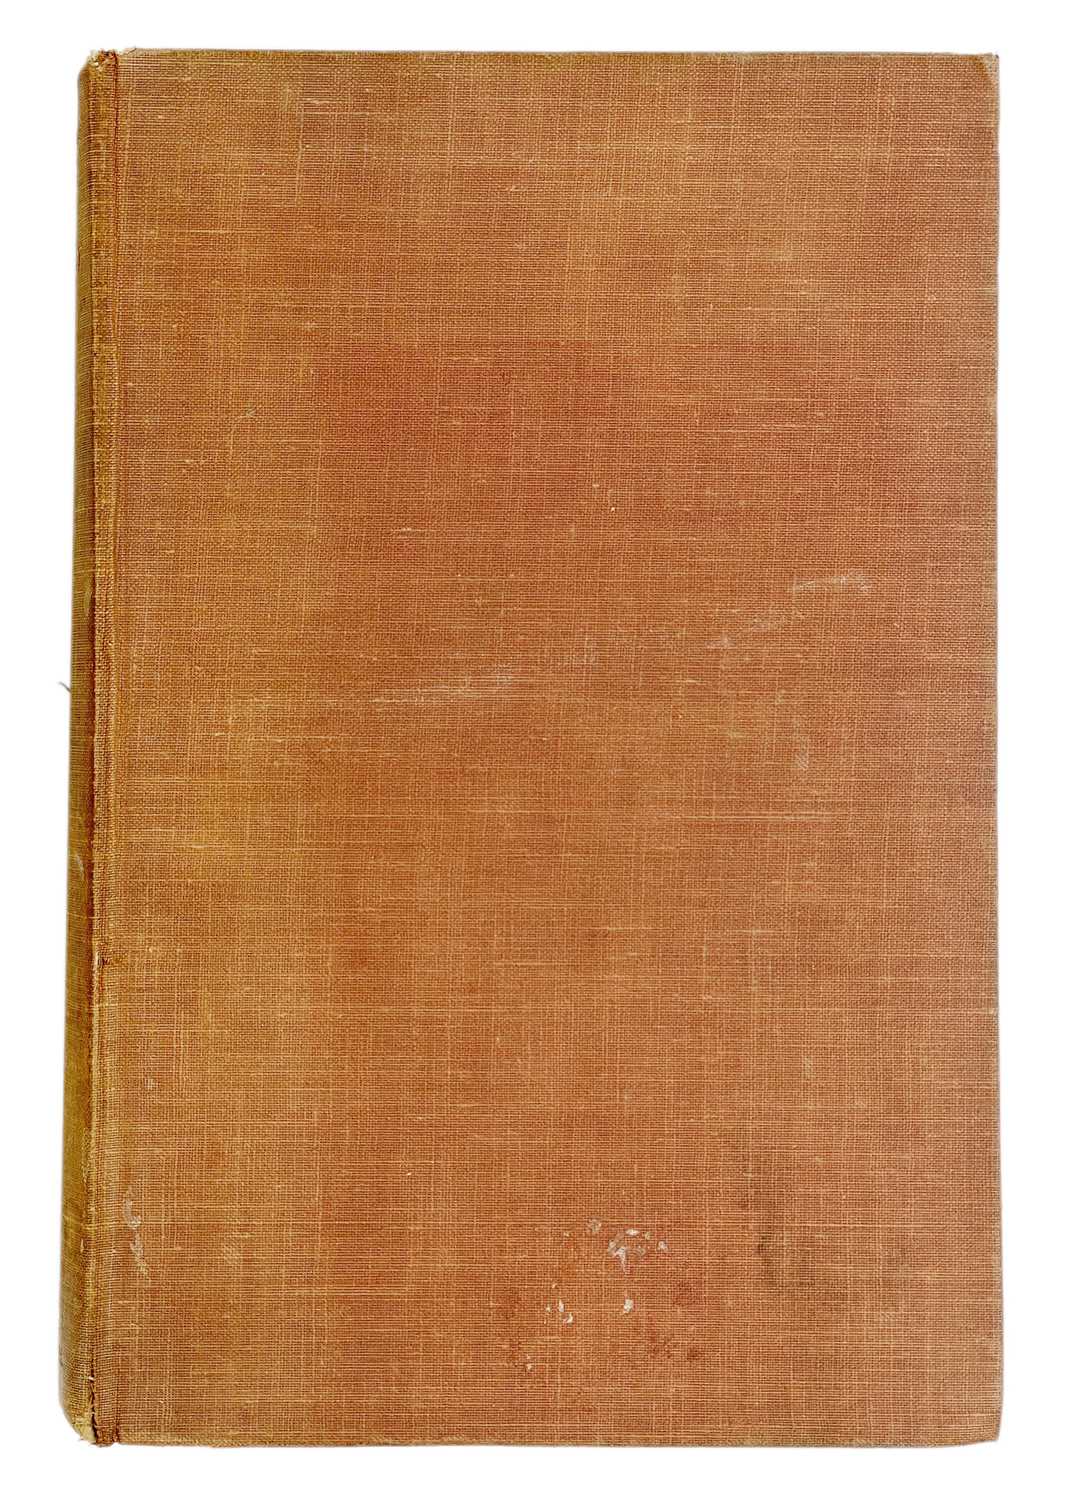 T. S. Eliot. 'Selected Essays 1917-1932,' first edition, lacks dj, original cloth, ink owner - Image 9 of 10